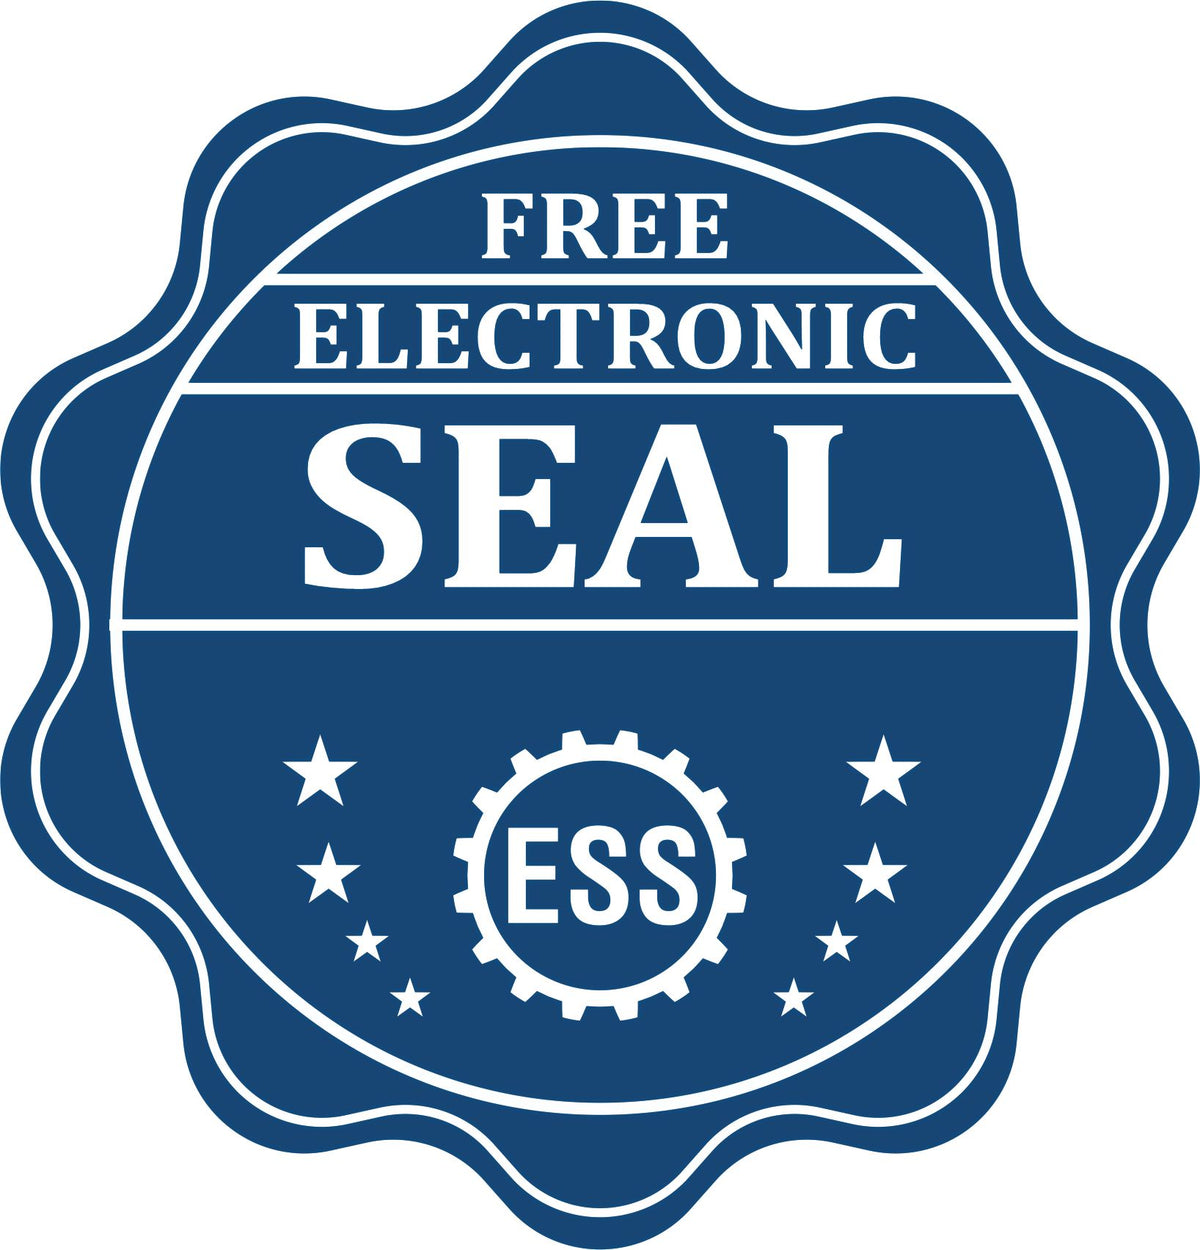 A badge showing a free electronic seal for the Premium MaxLight Pre-Inked Indiana Geology Stamp with stars and the ESS gear on the emblem.